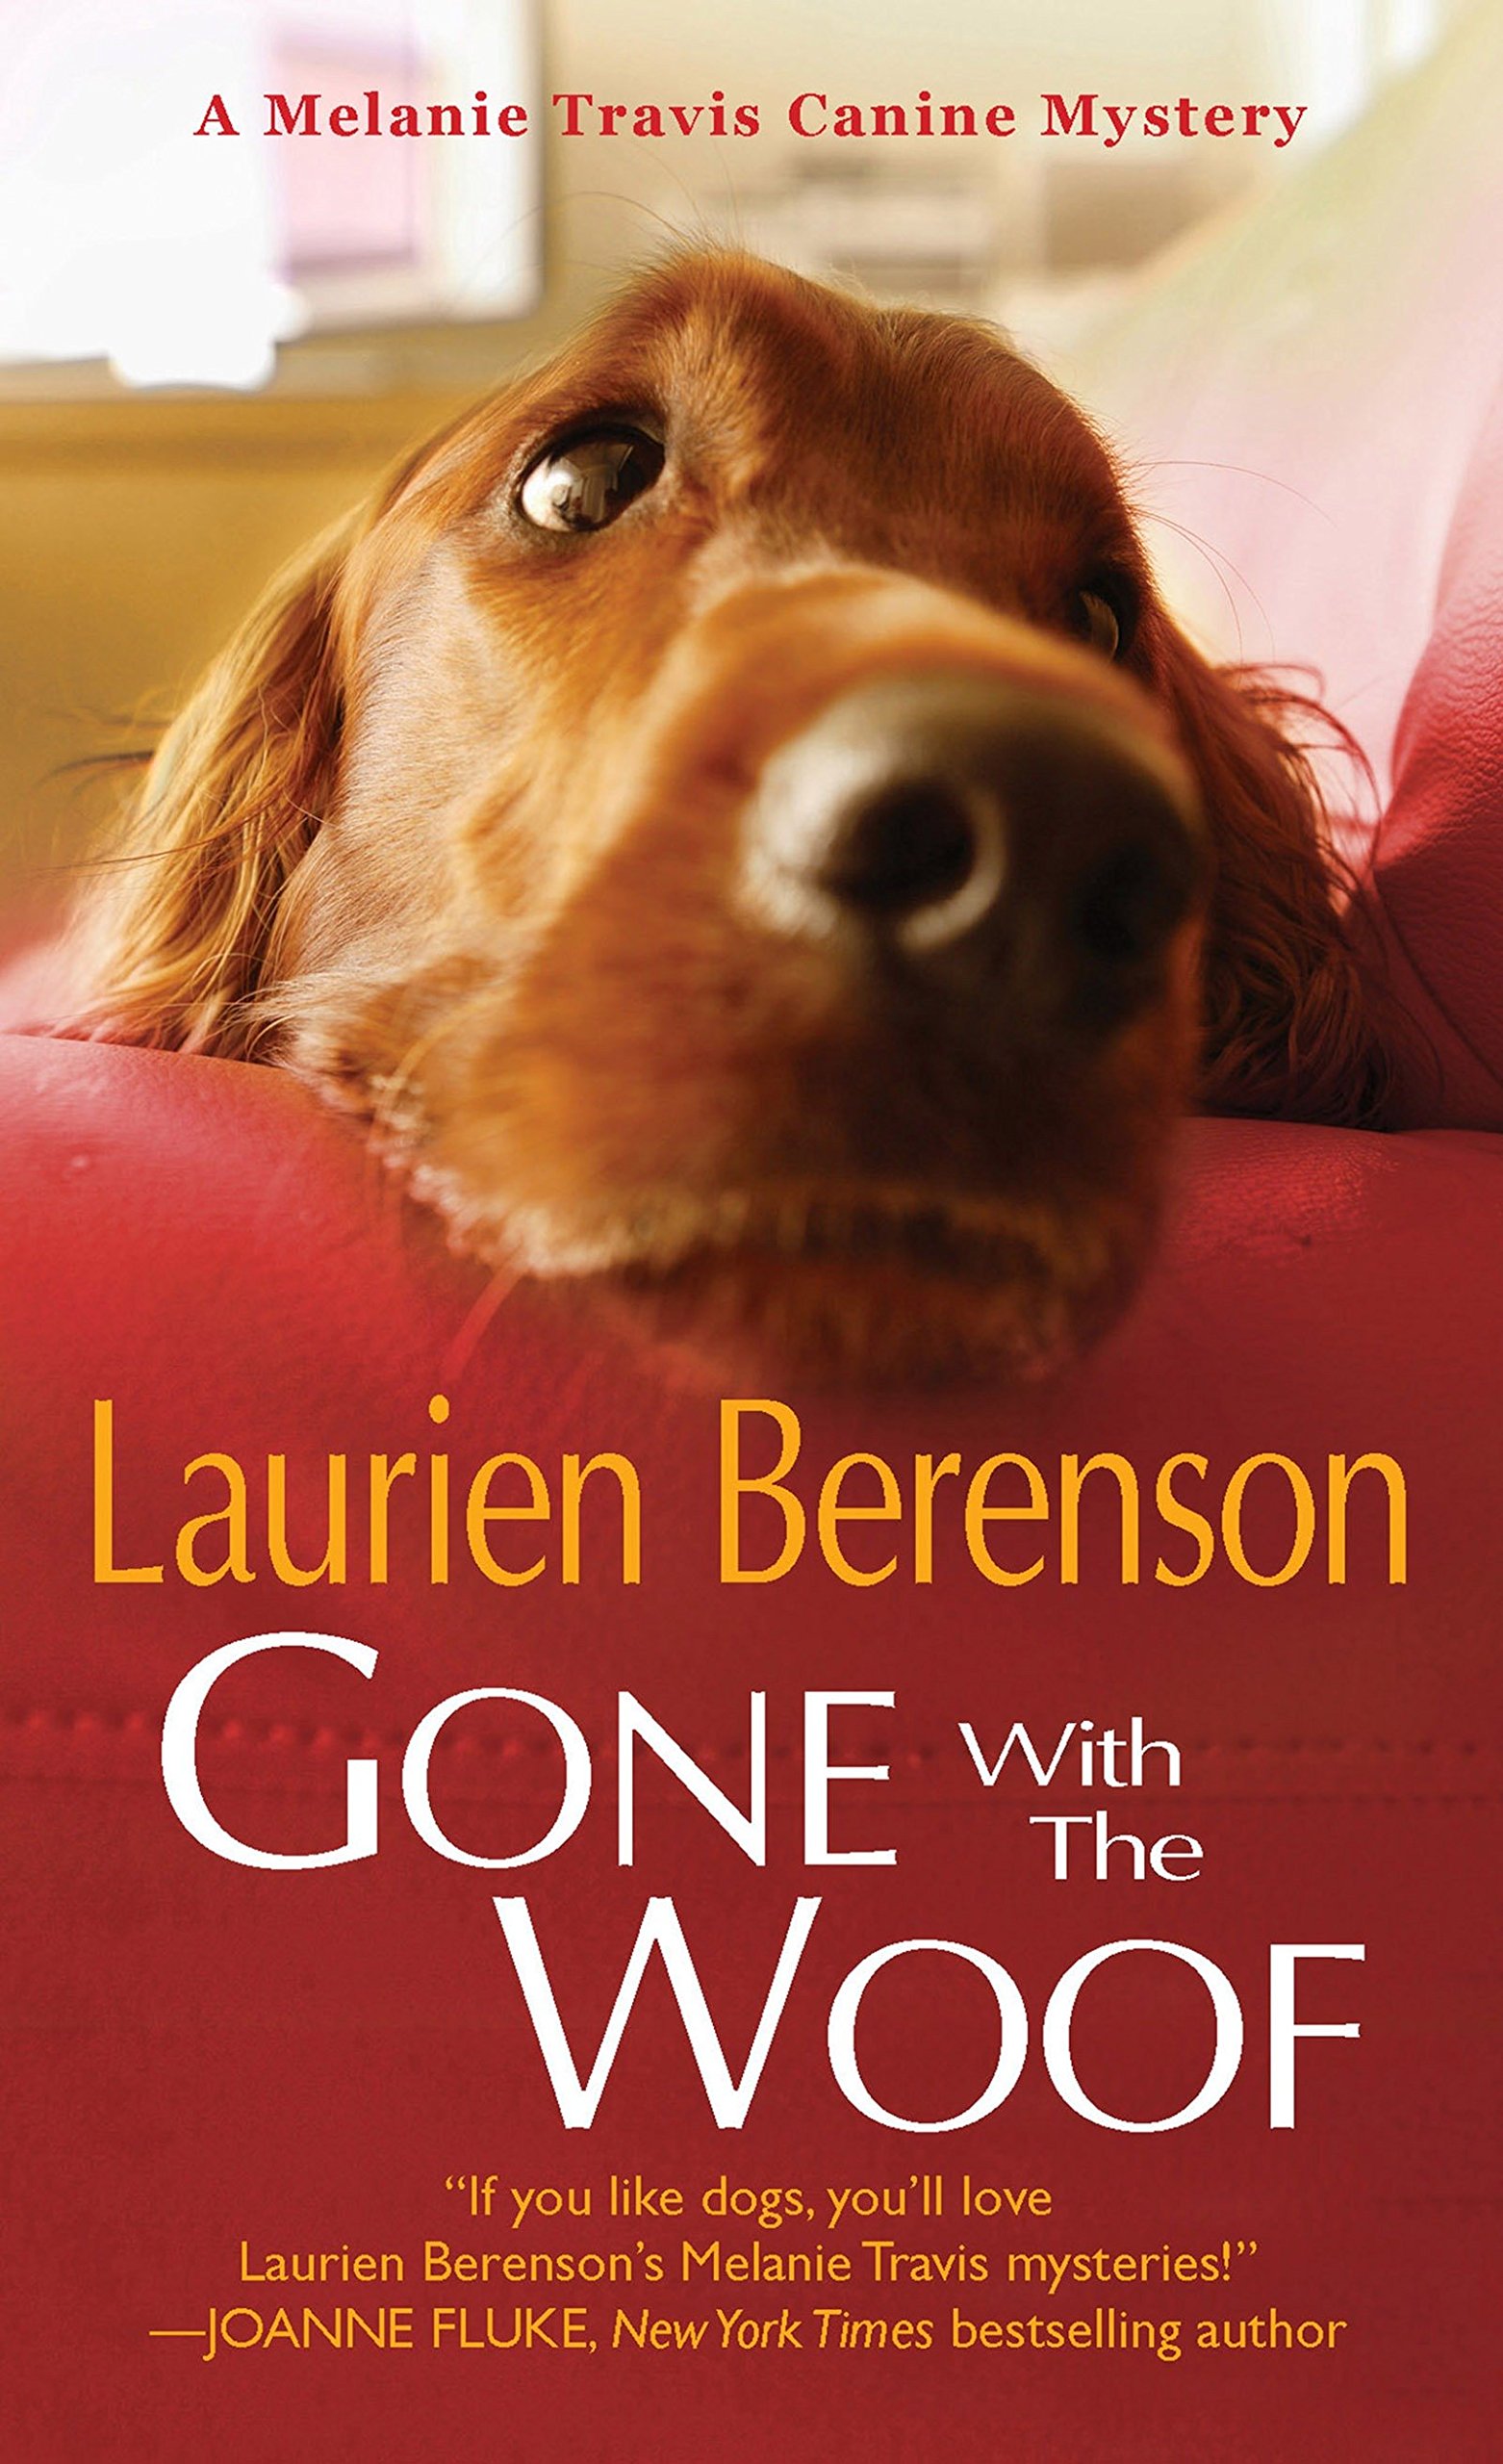 Image for "Gone with the Woof"